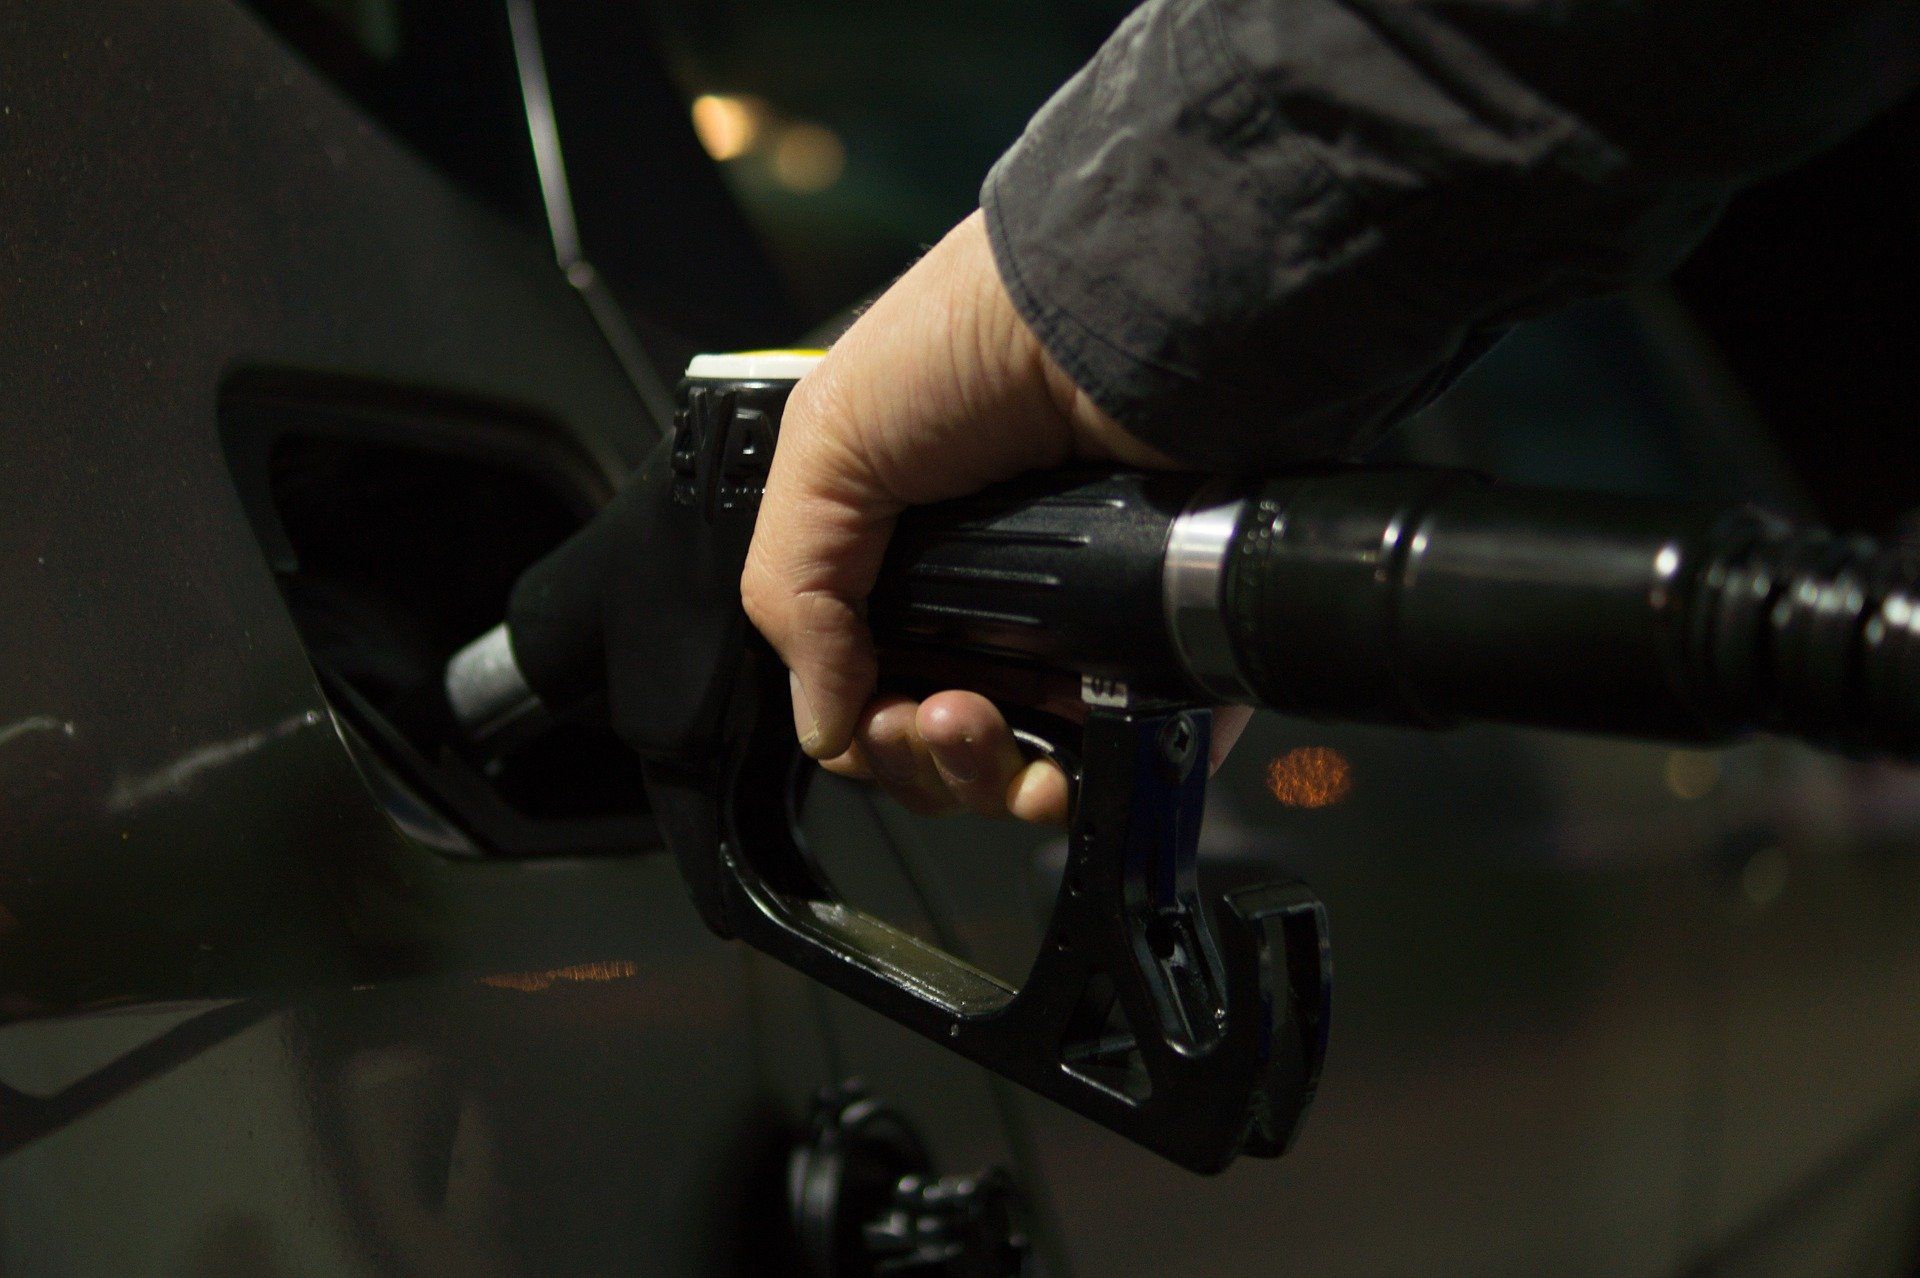 Fuel price today: Petrol and Diesel rates remain unchanged on April 18, 2022